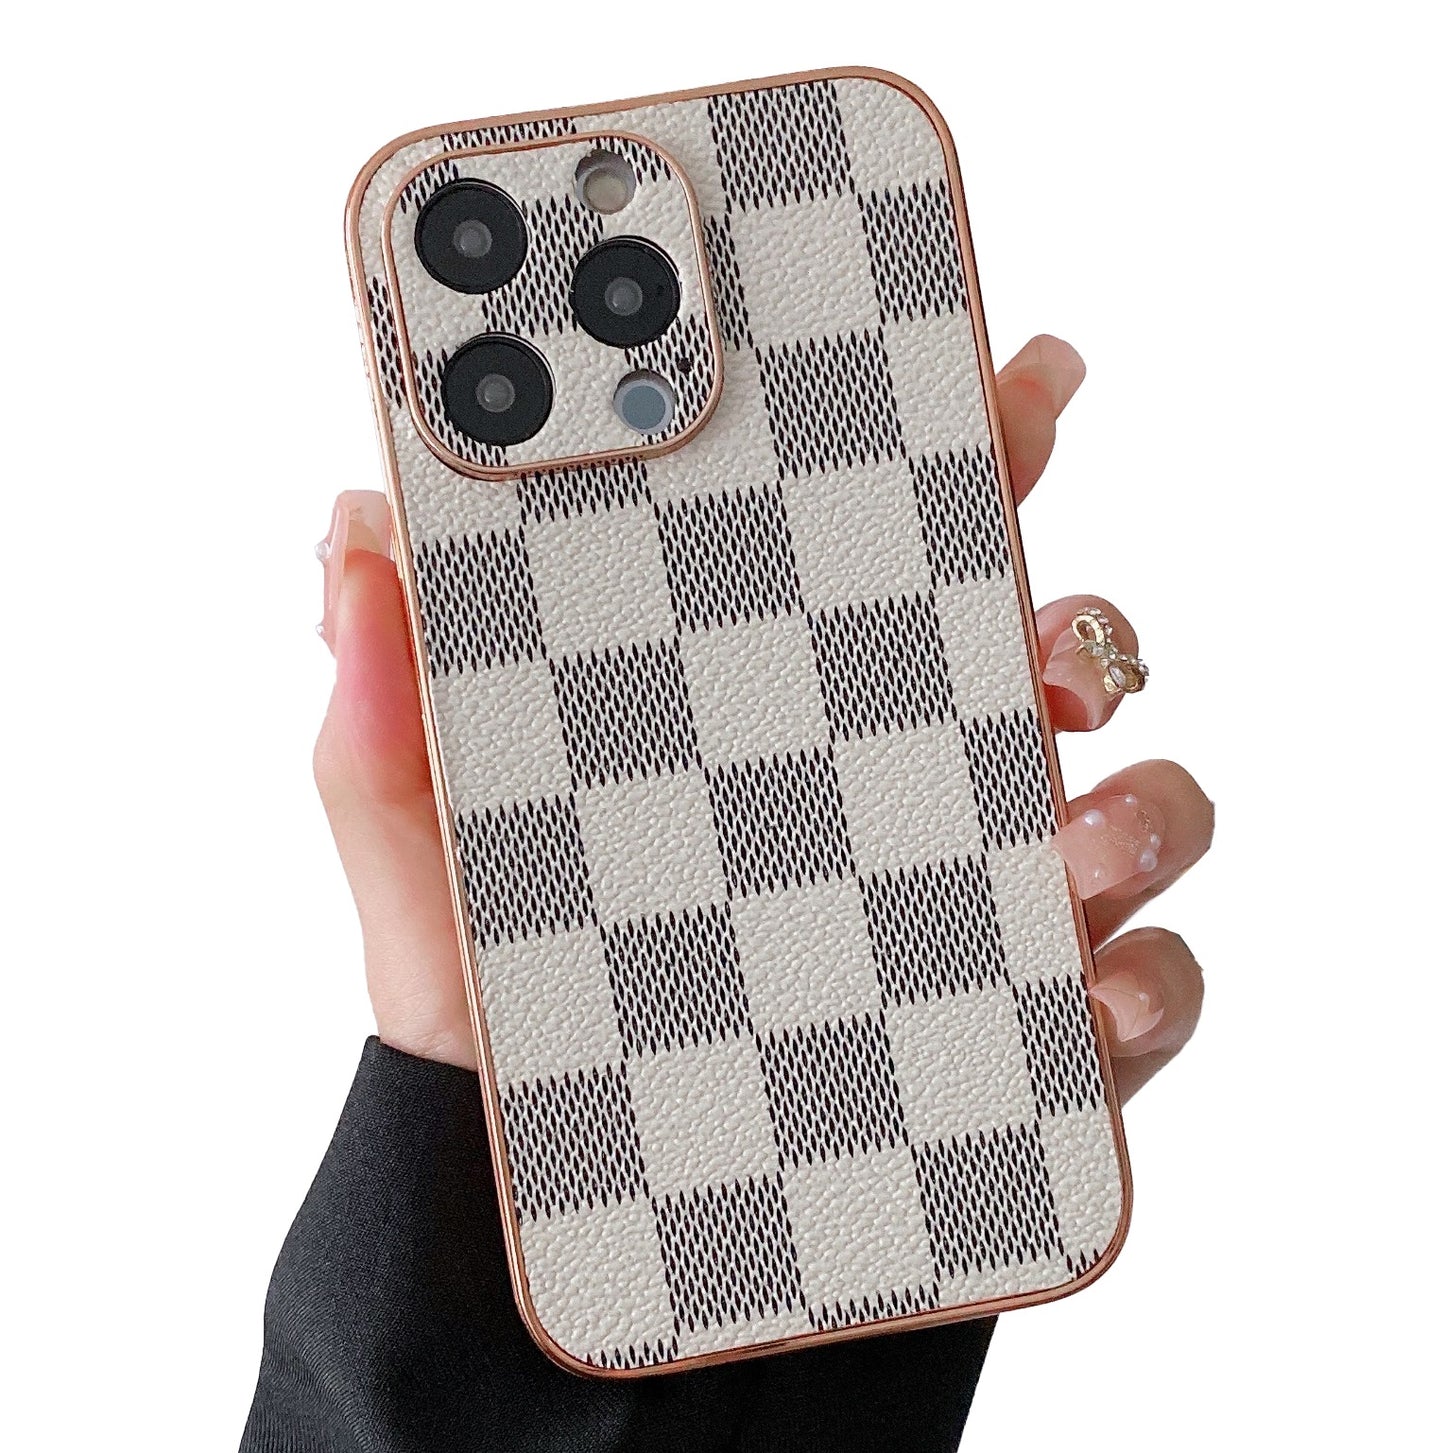 Louis Vuitton Coque Cover Case For Apple iPhone 14 Pro Max iPhone 13 12 11  /1